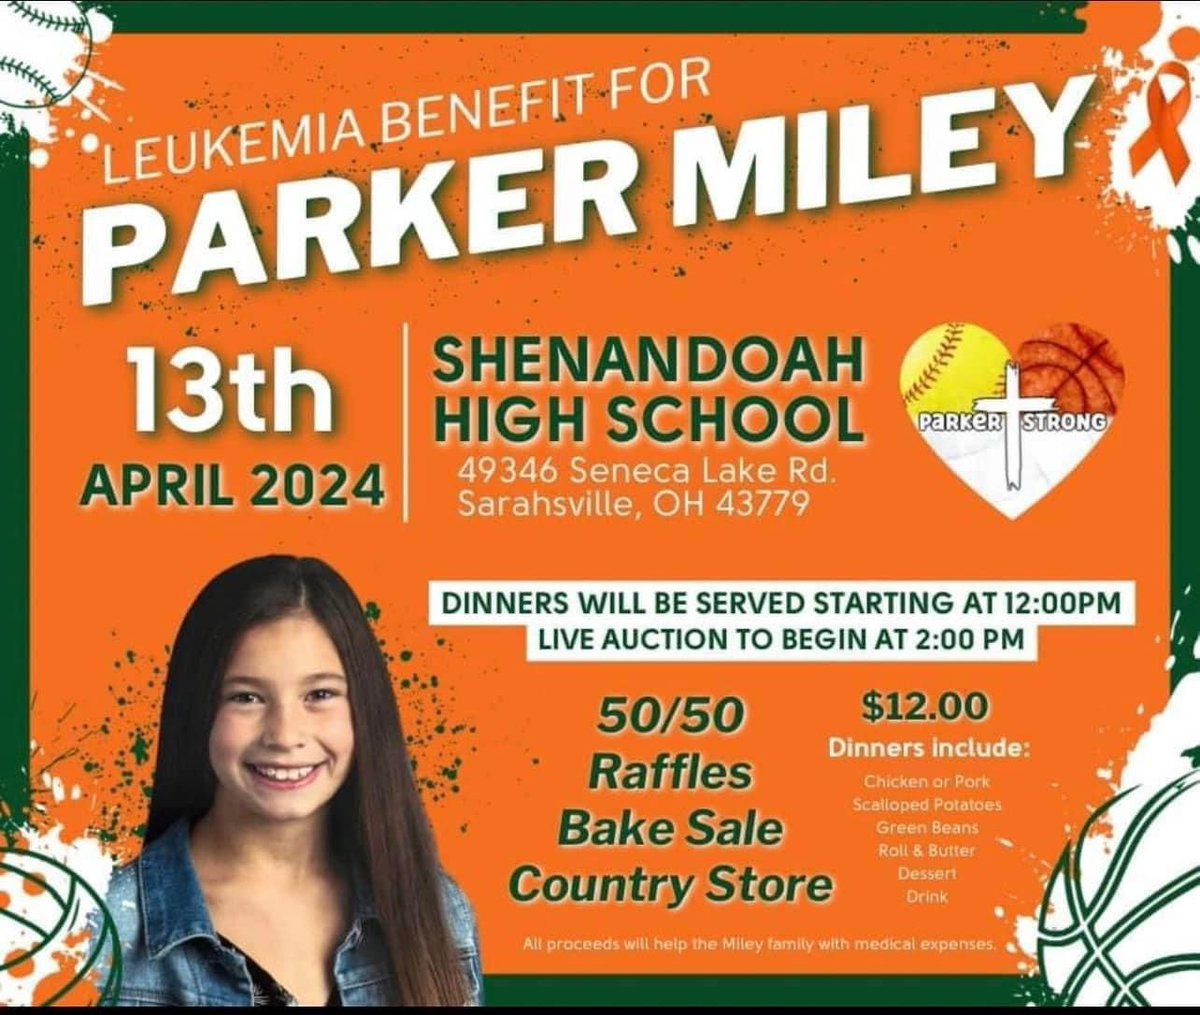 Don't forget, the Parker Miley Leukemia Benefit is happening tomorrow. See you there! 
#nobleimpact 🟠